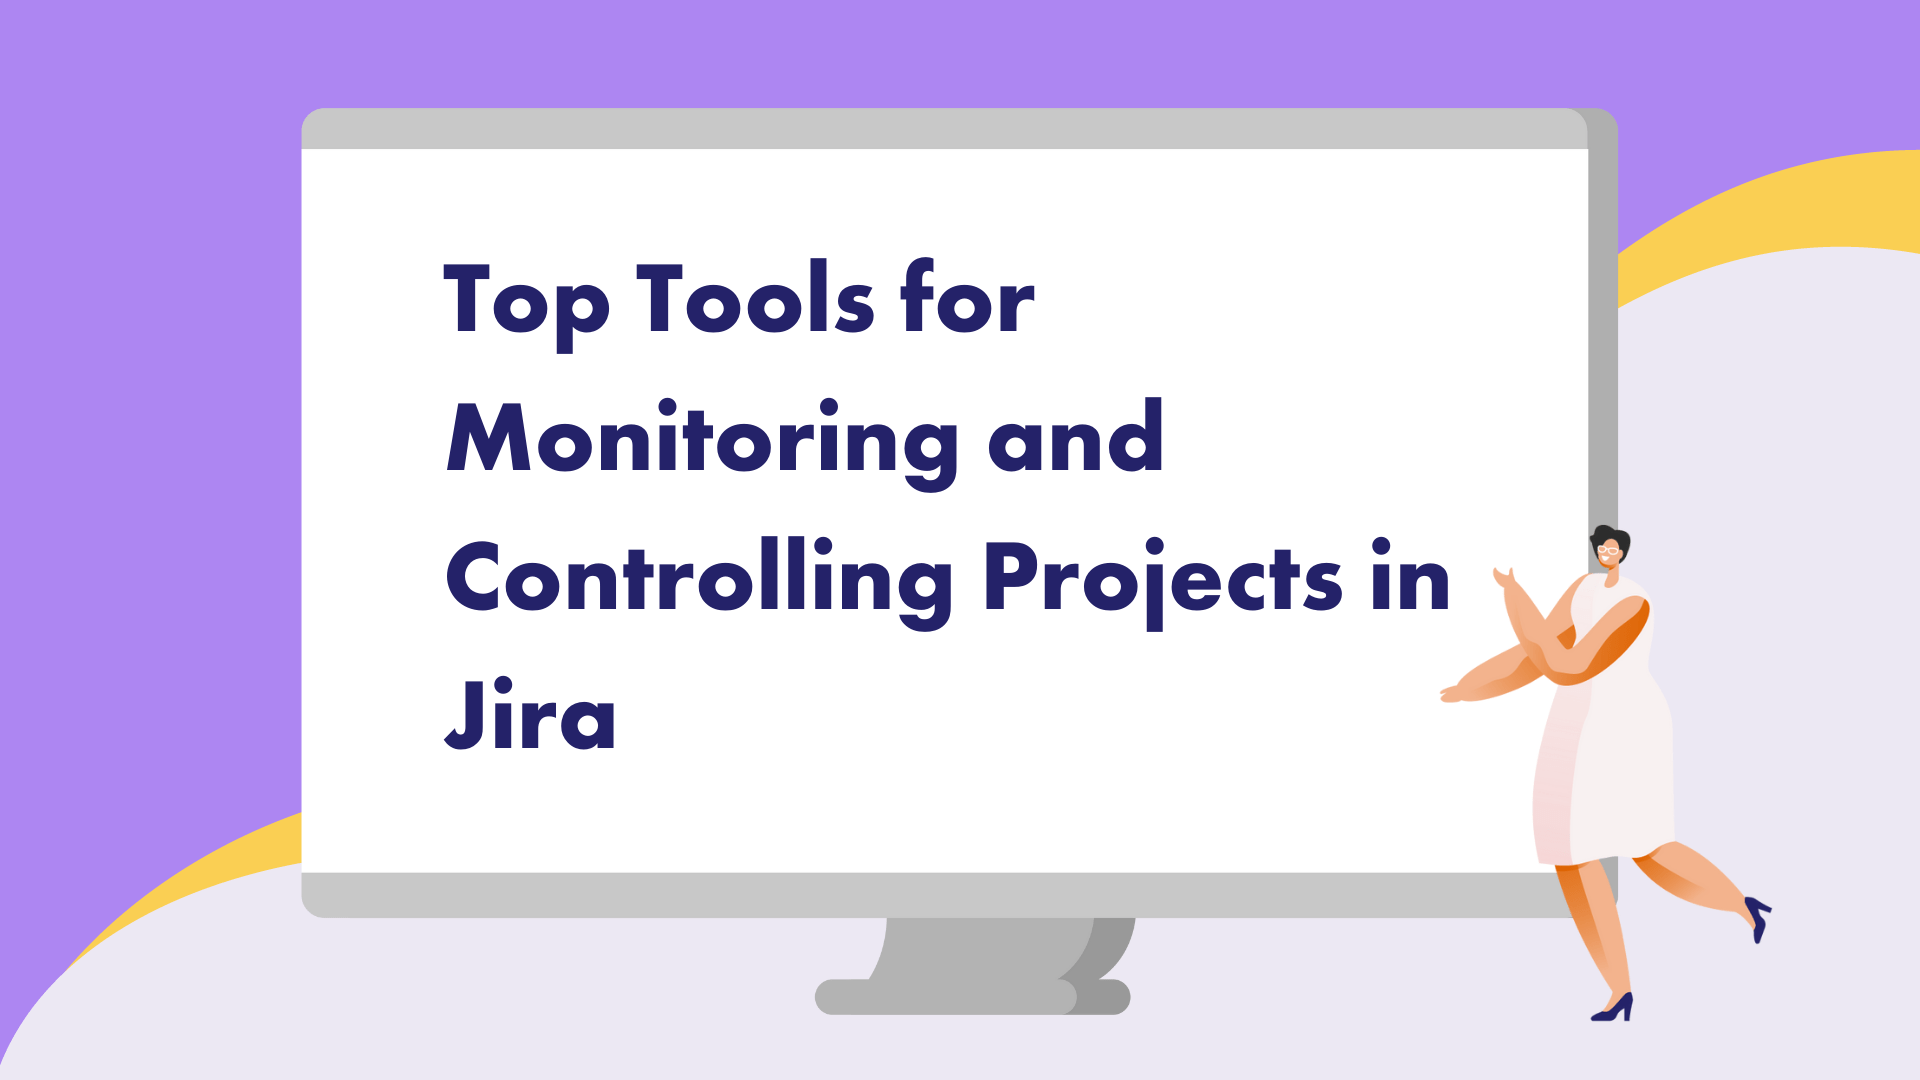 Top Tools for Monitoring and Controlling Projects in Jira